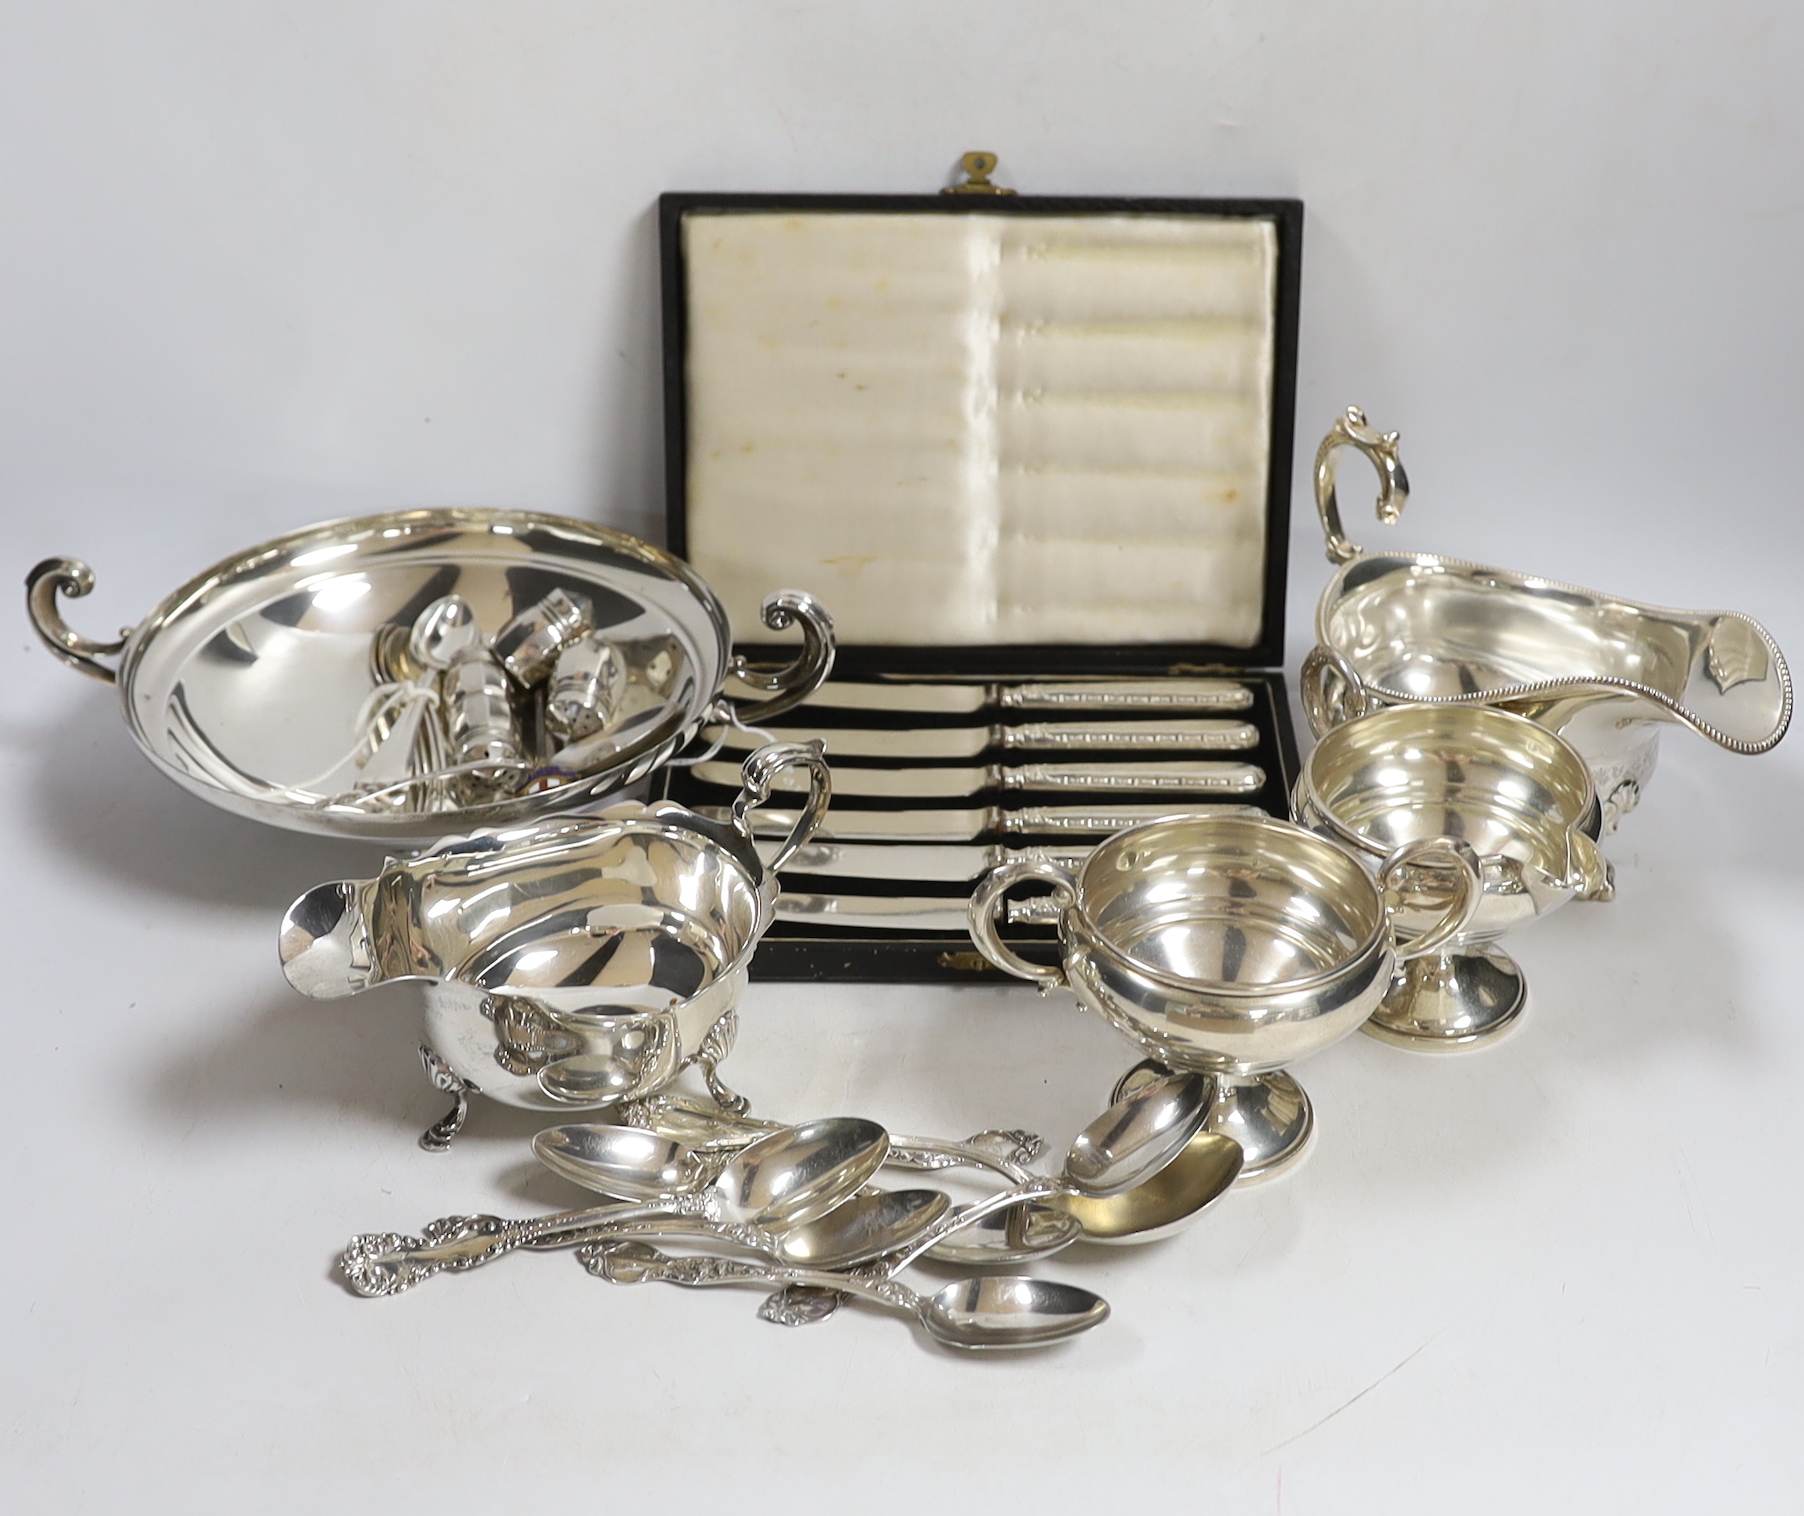 A small collection of silver including a sauceboat, two handled shallow bowl, five teaspoons and a commemorative spoon, together with a sterling cream jug and sugar bowl, sterling flatware and set of four pepperettes, to